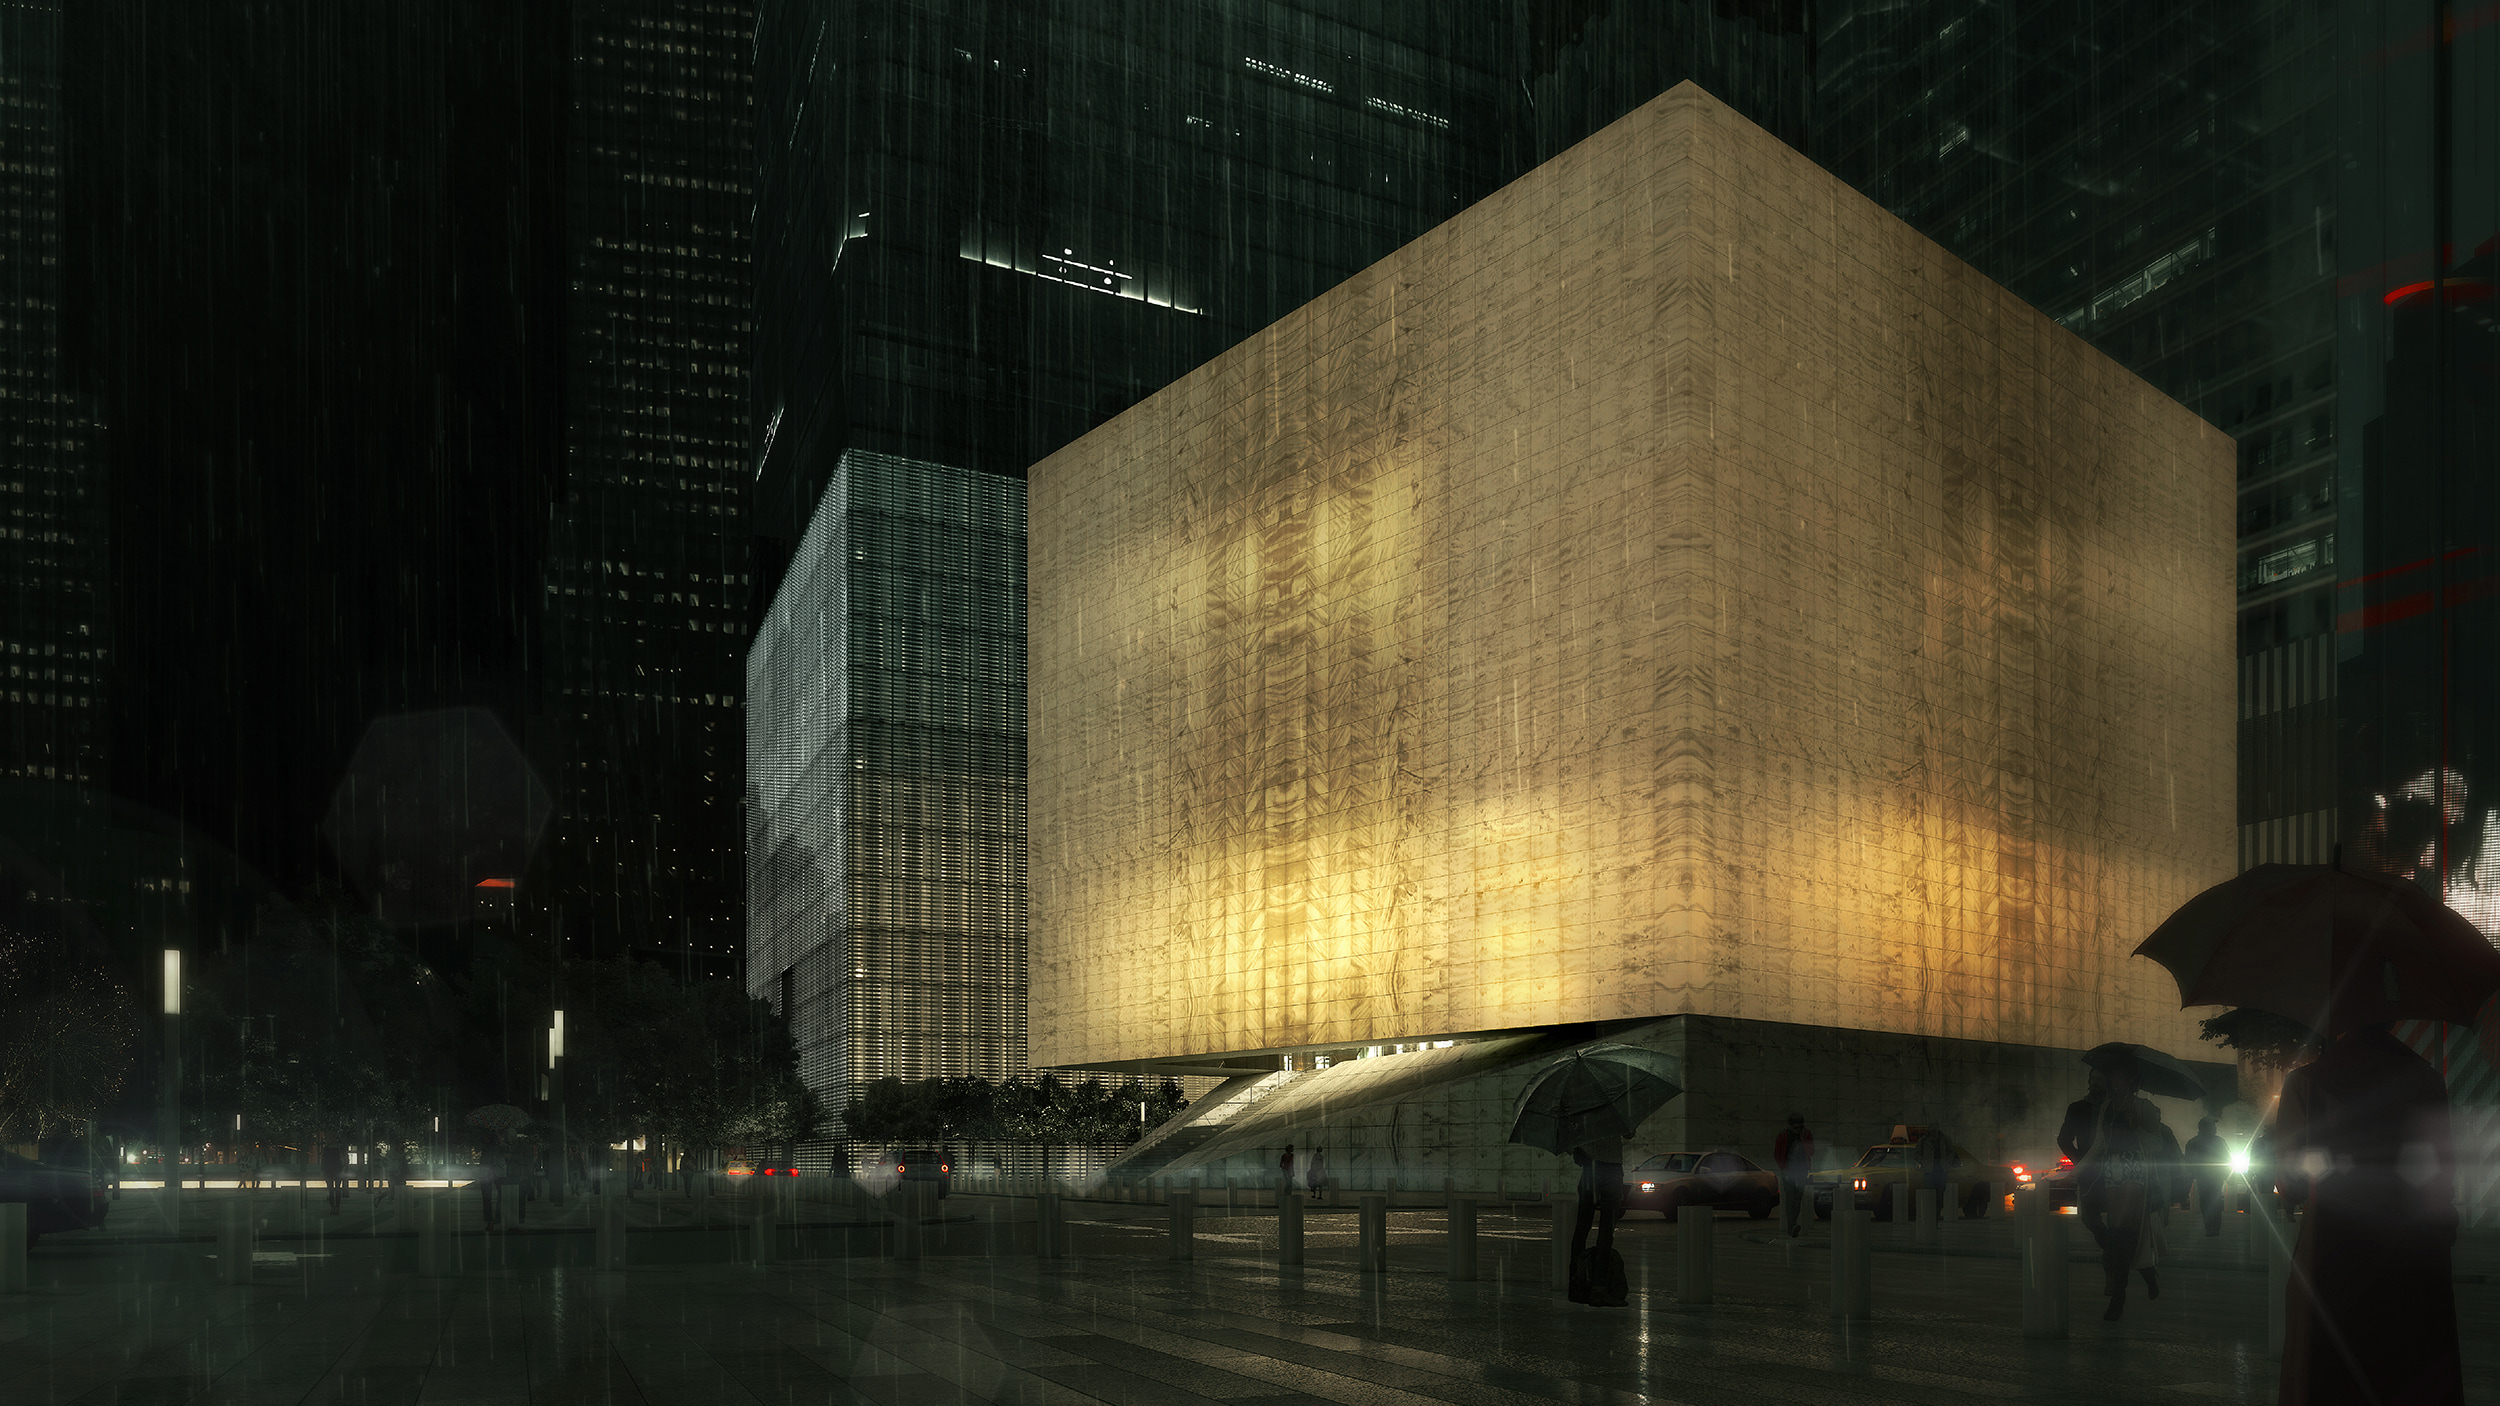 A night visualization of The Perelman Performing Arts Center at the World Trade Center.